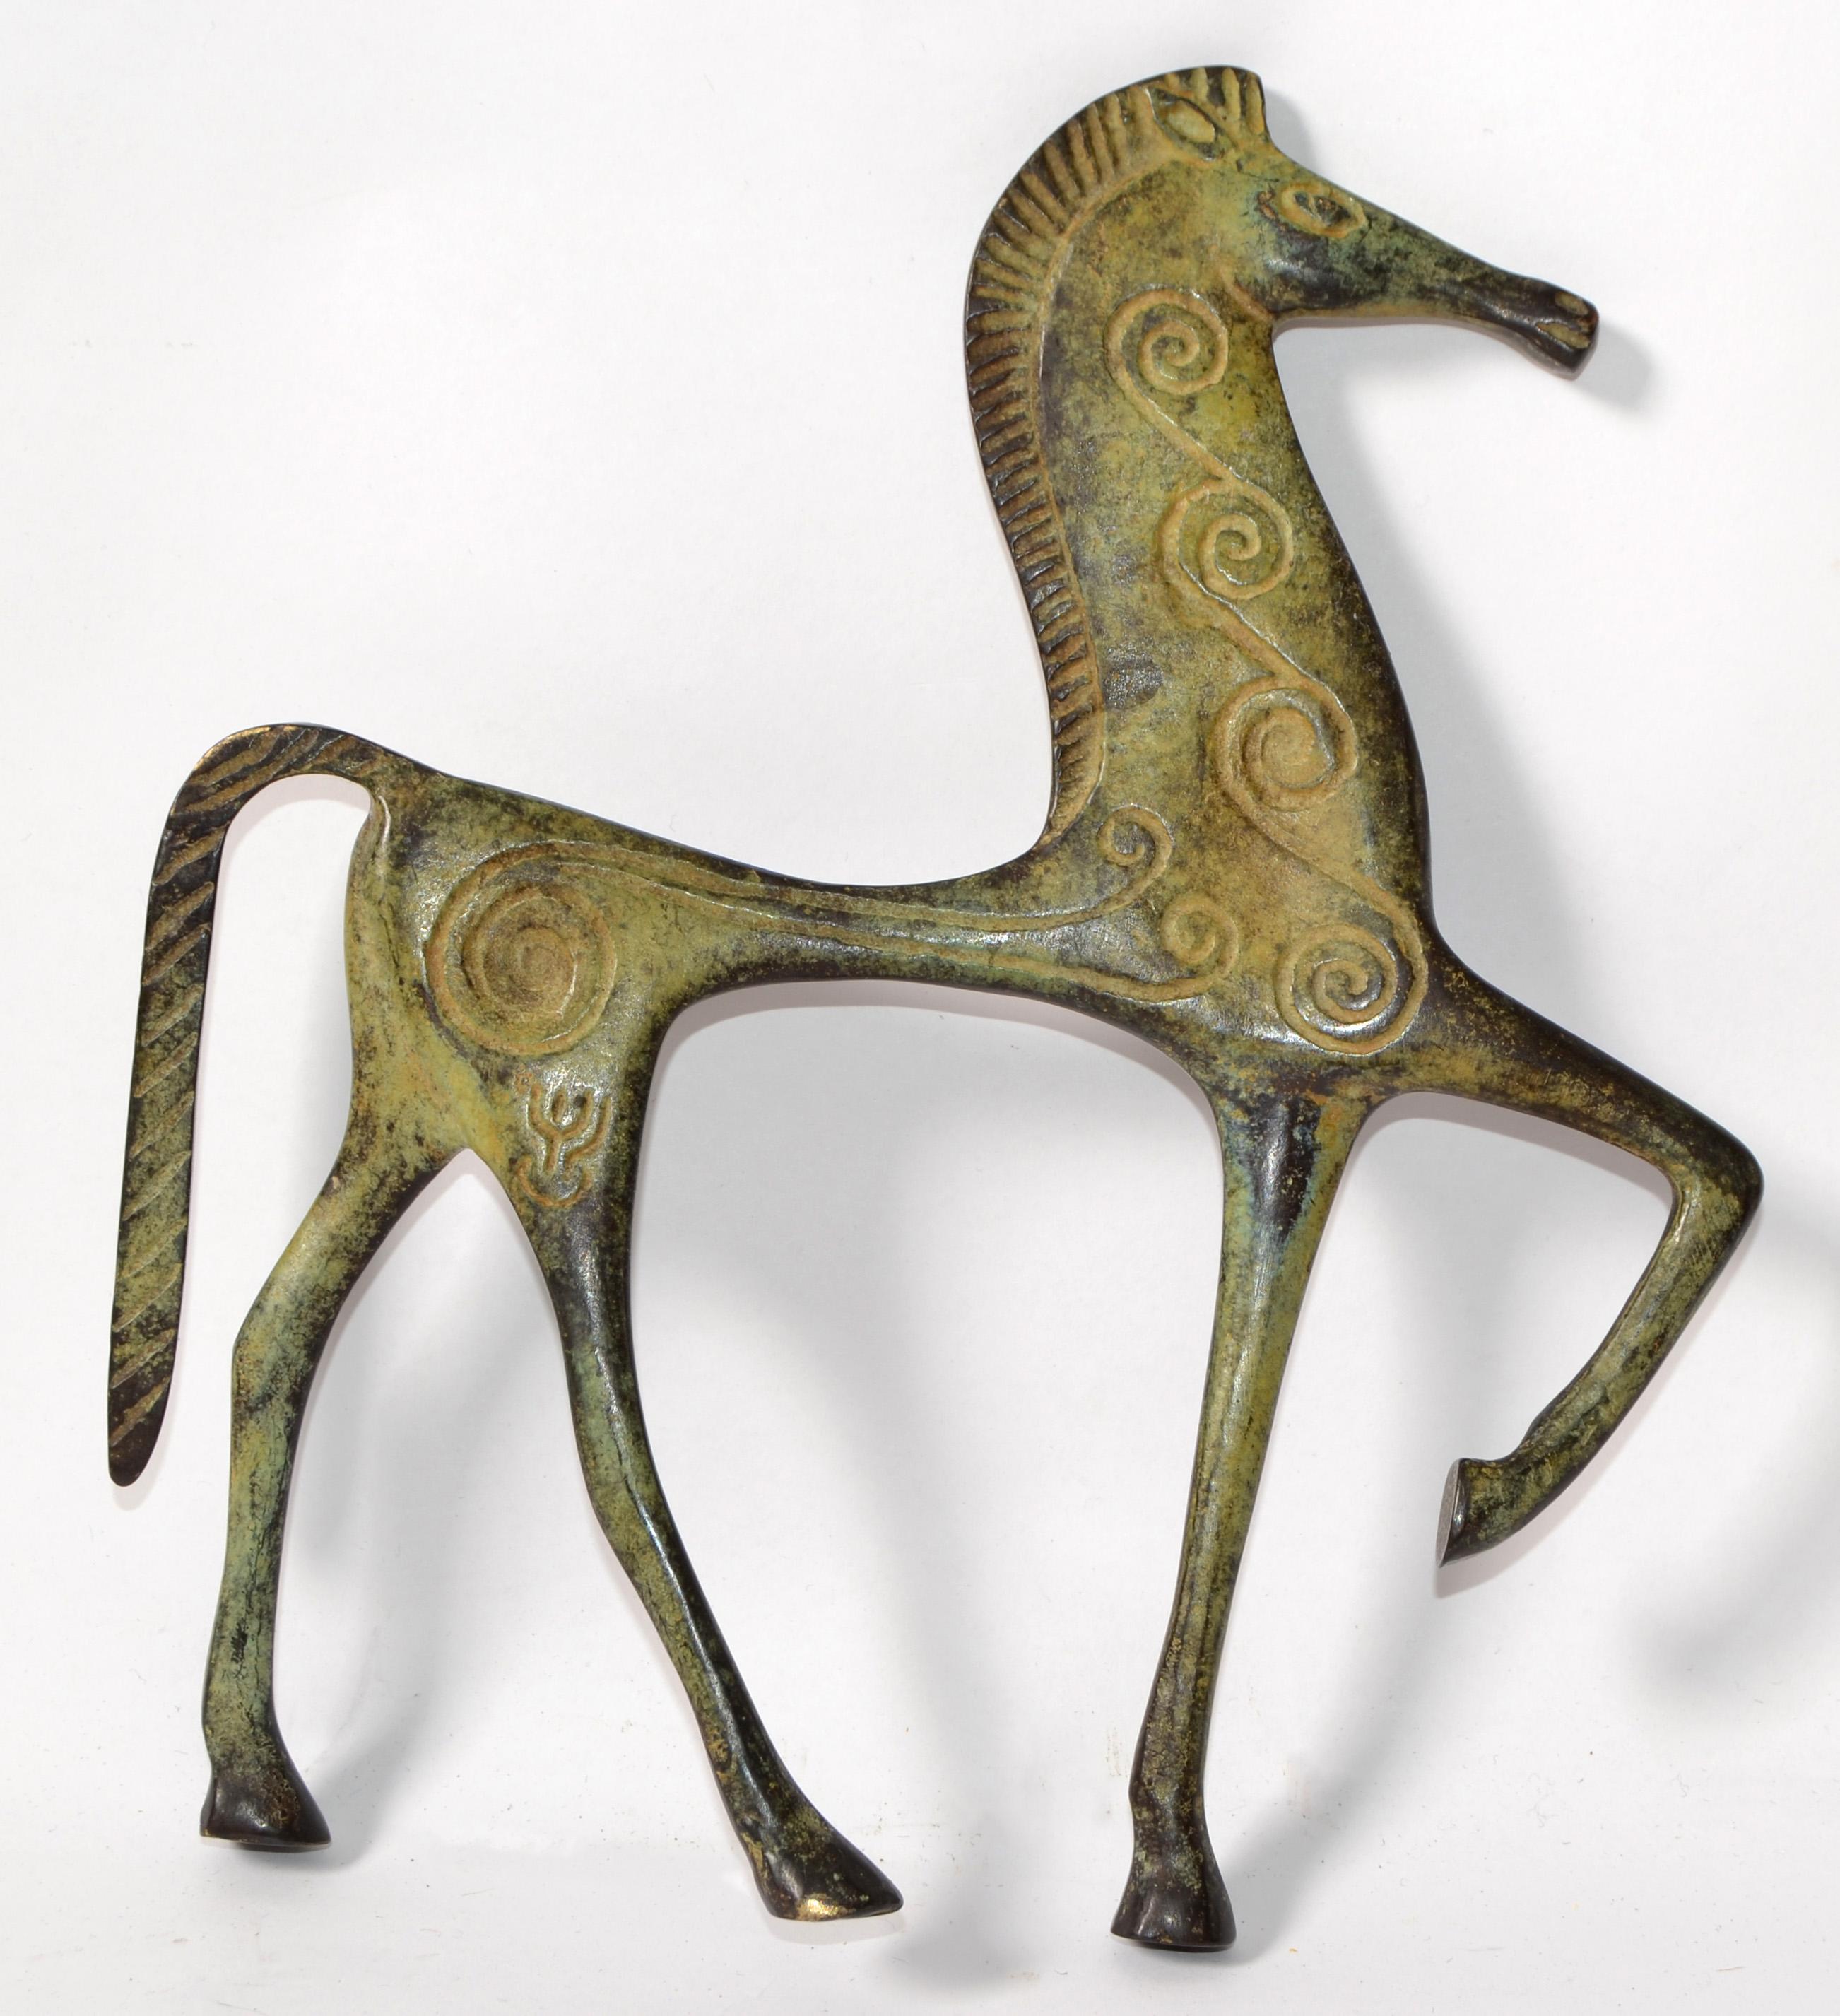 This is a bronze sculpture, which may have been done by Frederic Weinberg for Raymor.
It is an incredibly stylized Roman decorated horse Figurine and has a patina finish. Italian-made and great for any Mid-Century Modern interior.
It looks like the